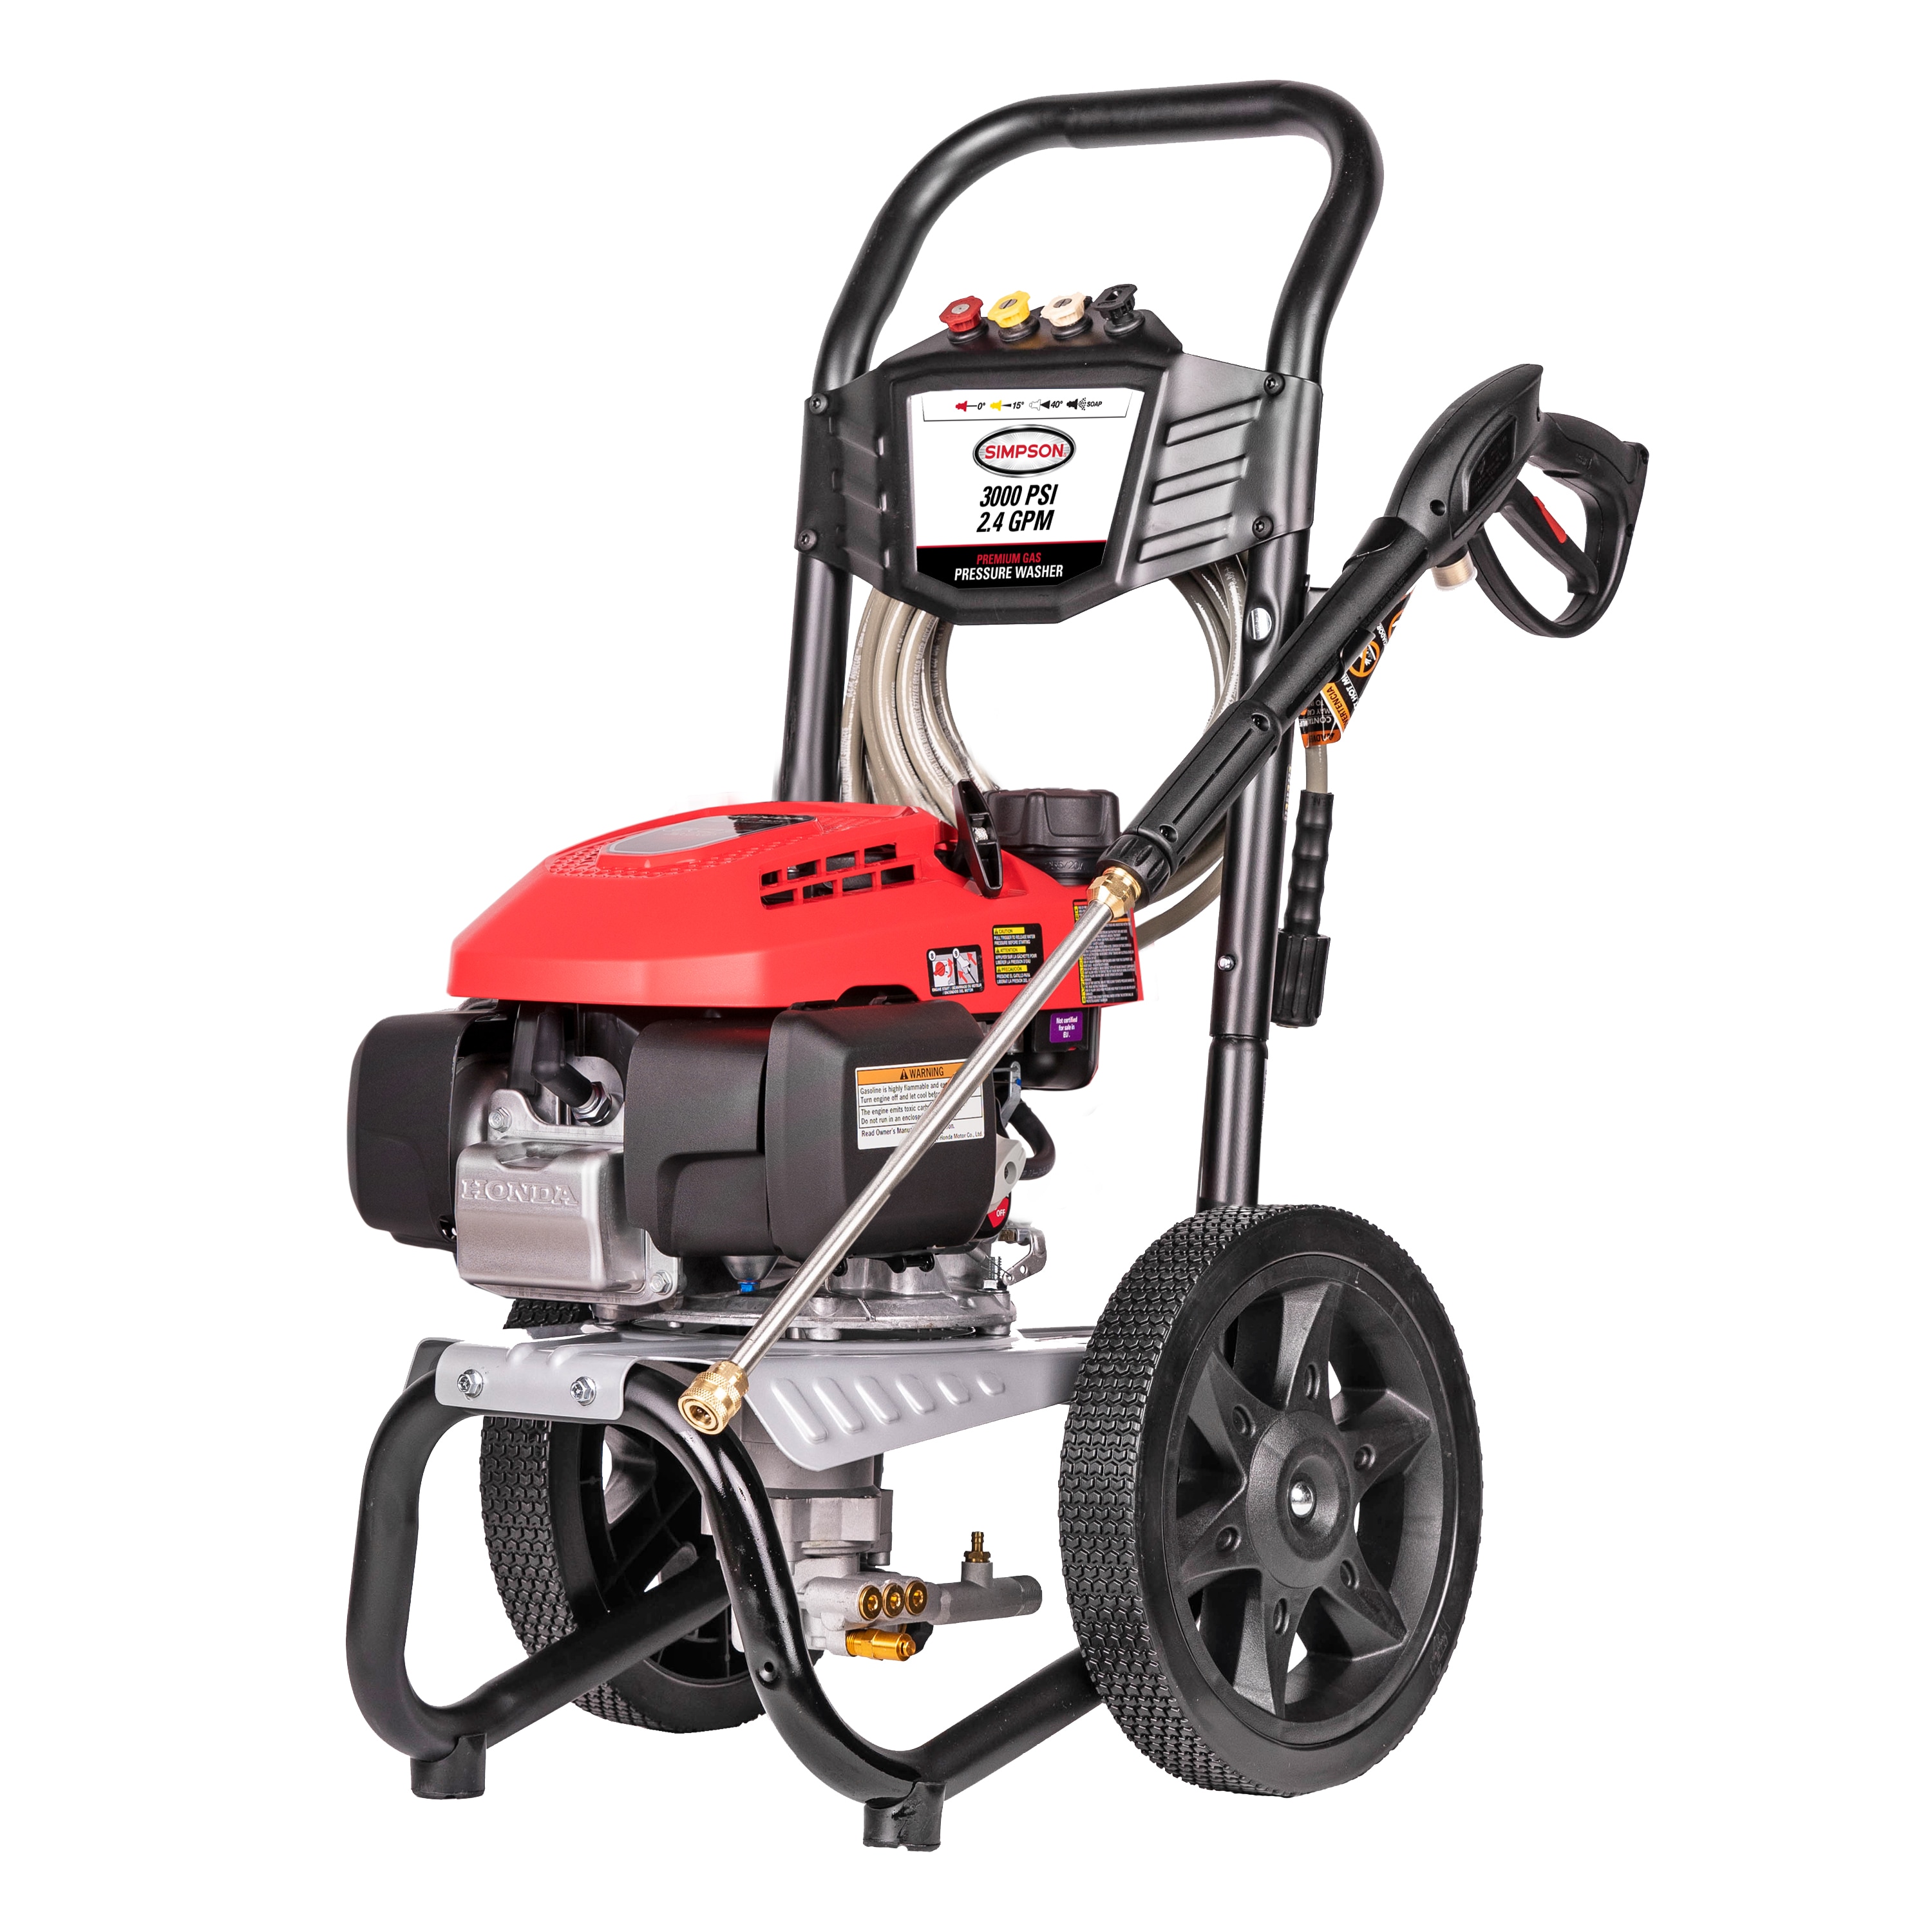 SIMPSON Megashot 3000 PSI 2.4-GPM Cold Water Gas Pressure Washer in Red | MS61228S -  FNA GROUP, 106014